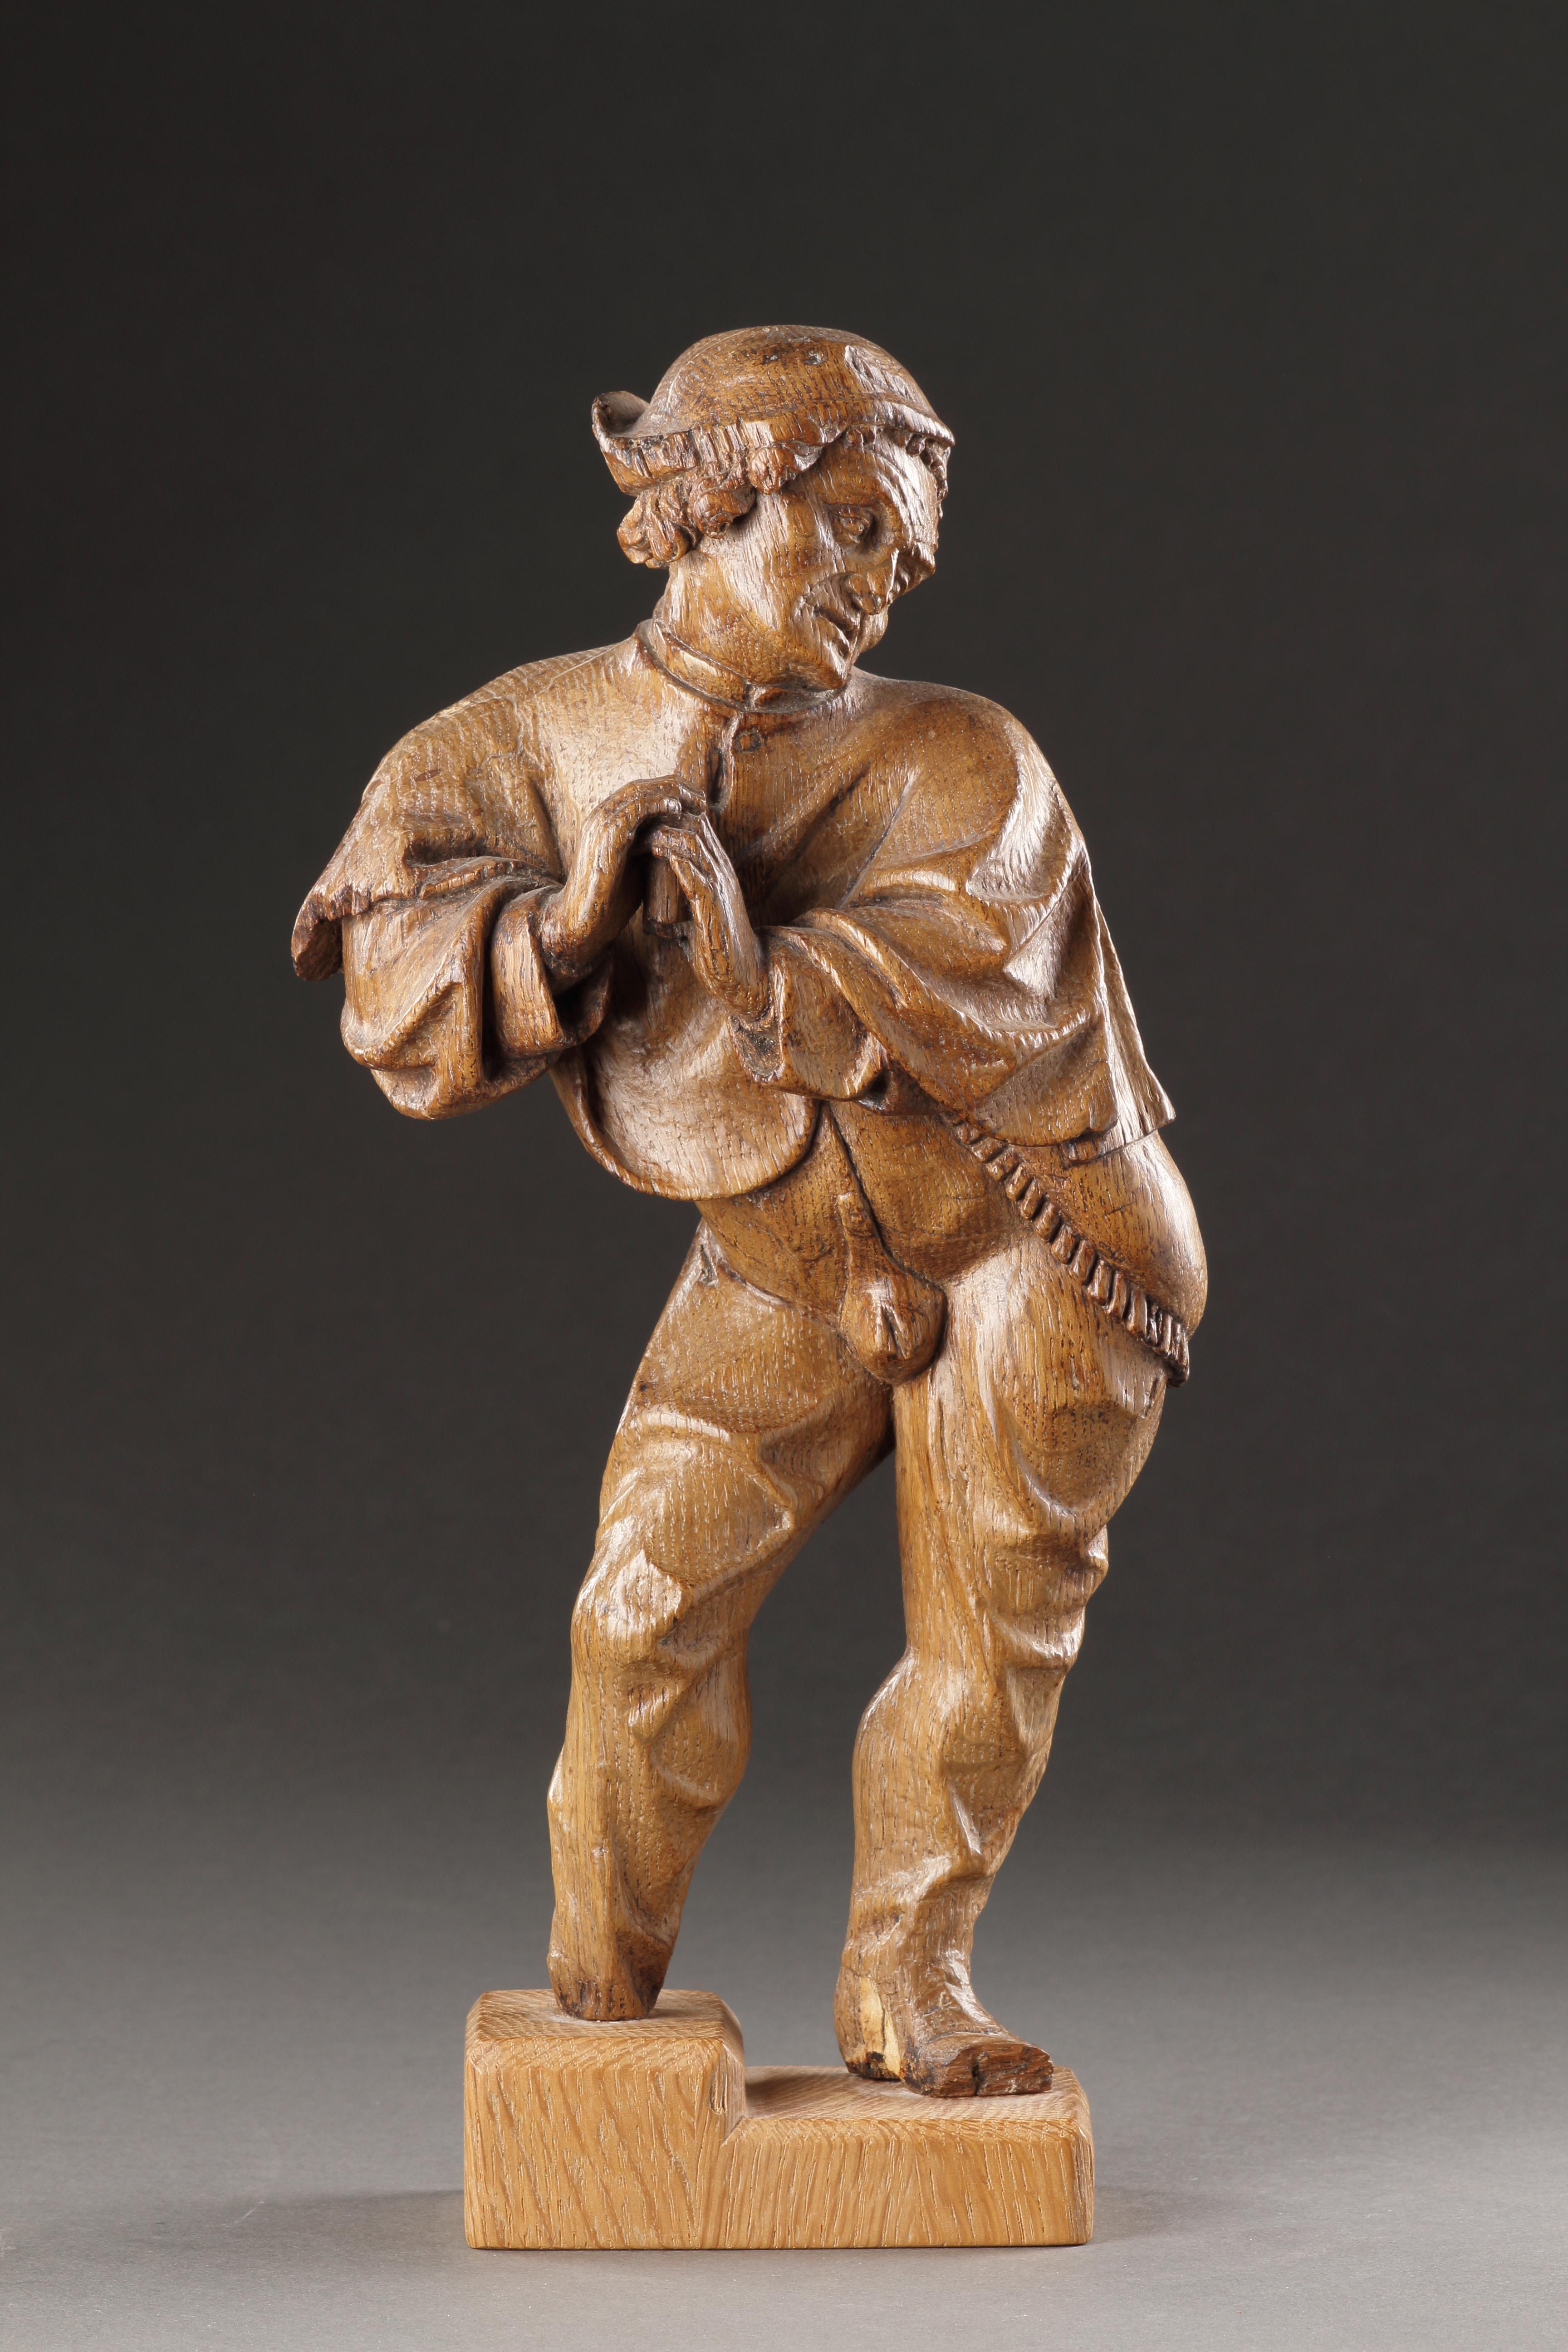 A Fine Flemish Carved Figure of a Man
Attributed to Henrick Douverman (c. 1480 - 1543) (sometimes known as Heinrich Douwermann)
Wood (oak)
Flemish
Early 16th Century

SIZE: 28cm high - 11 ins high

Henrick Douverman worked in Kalkar, in the Lower